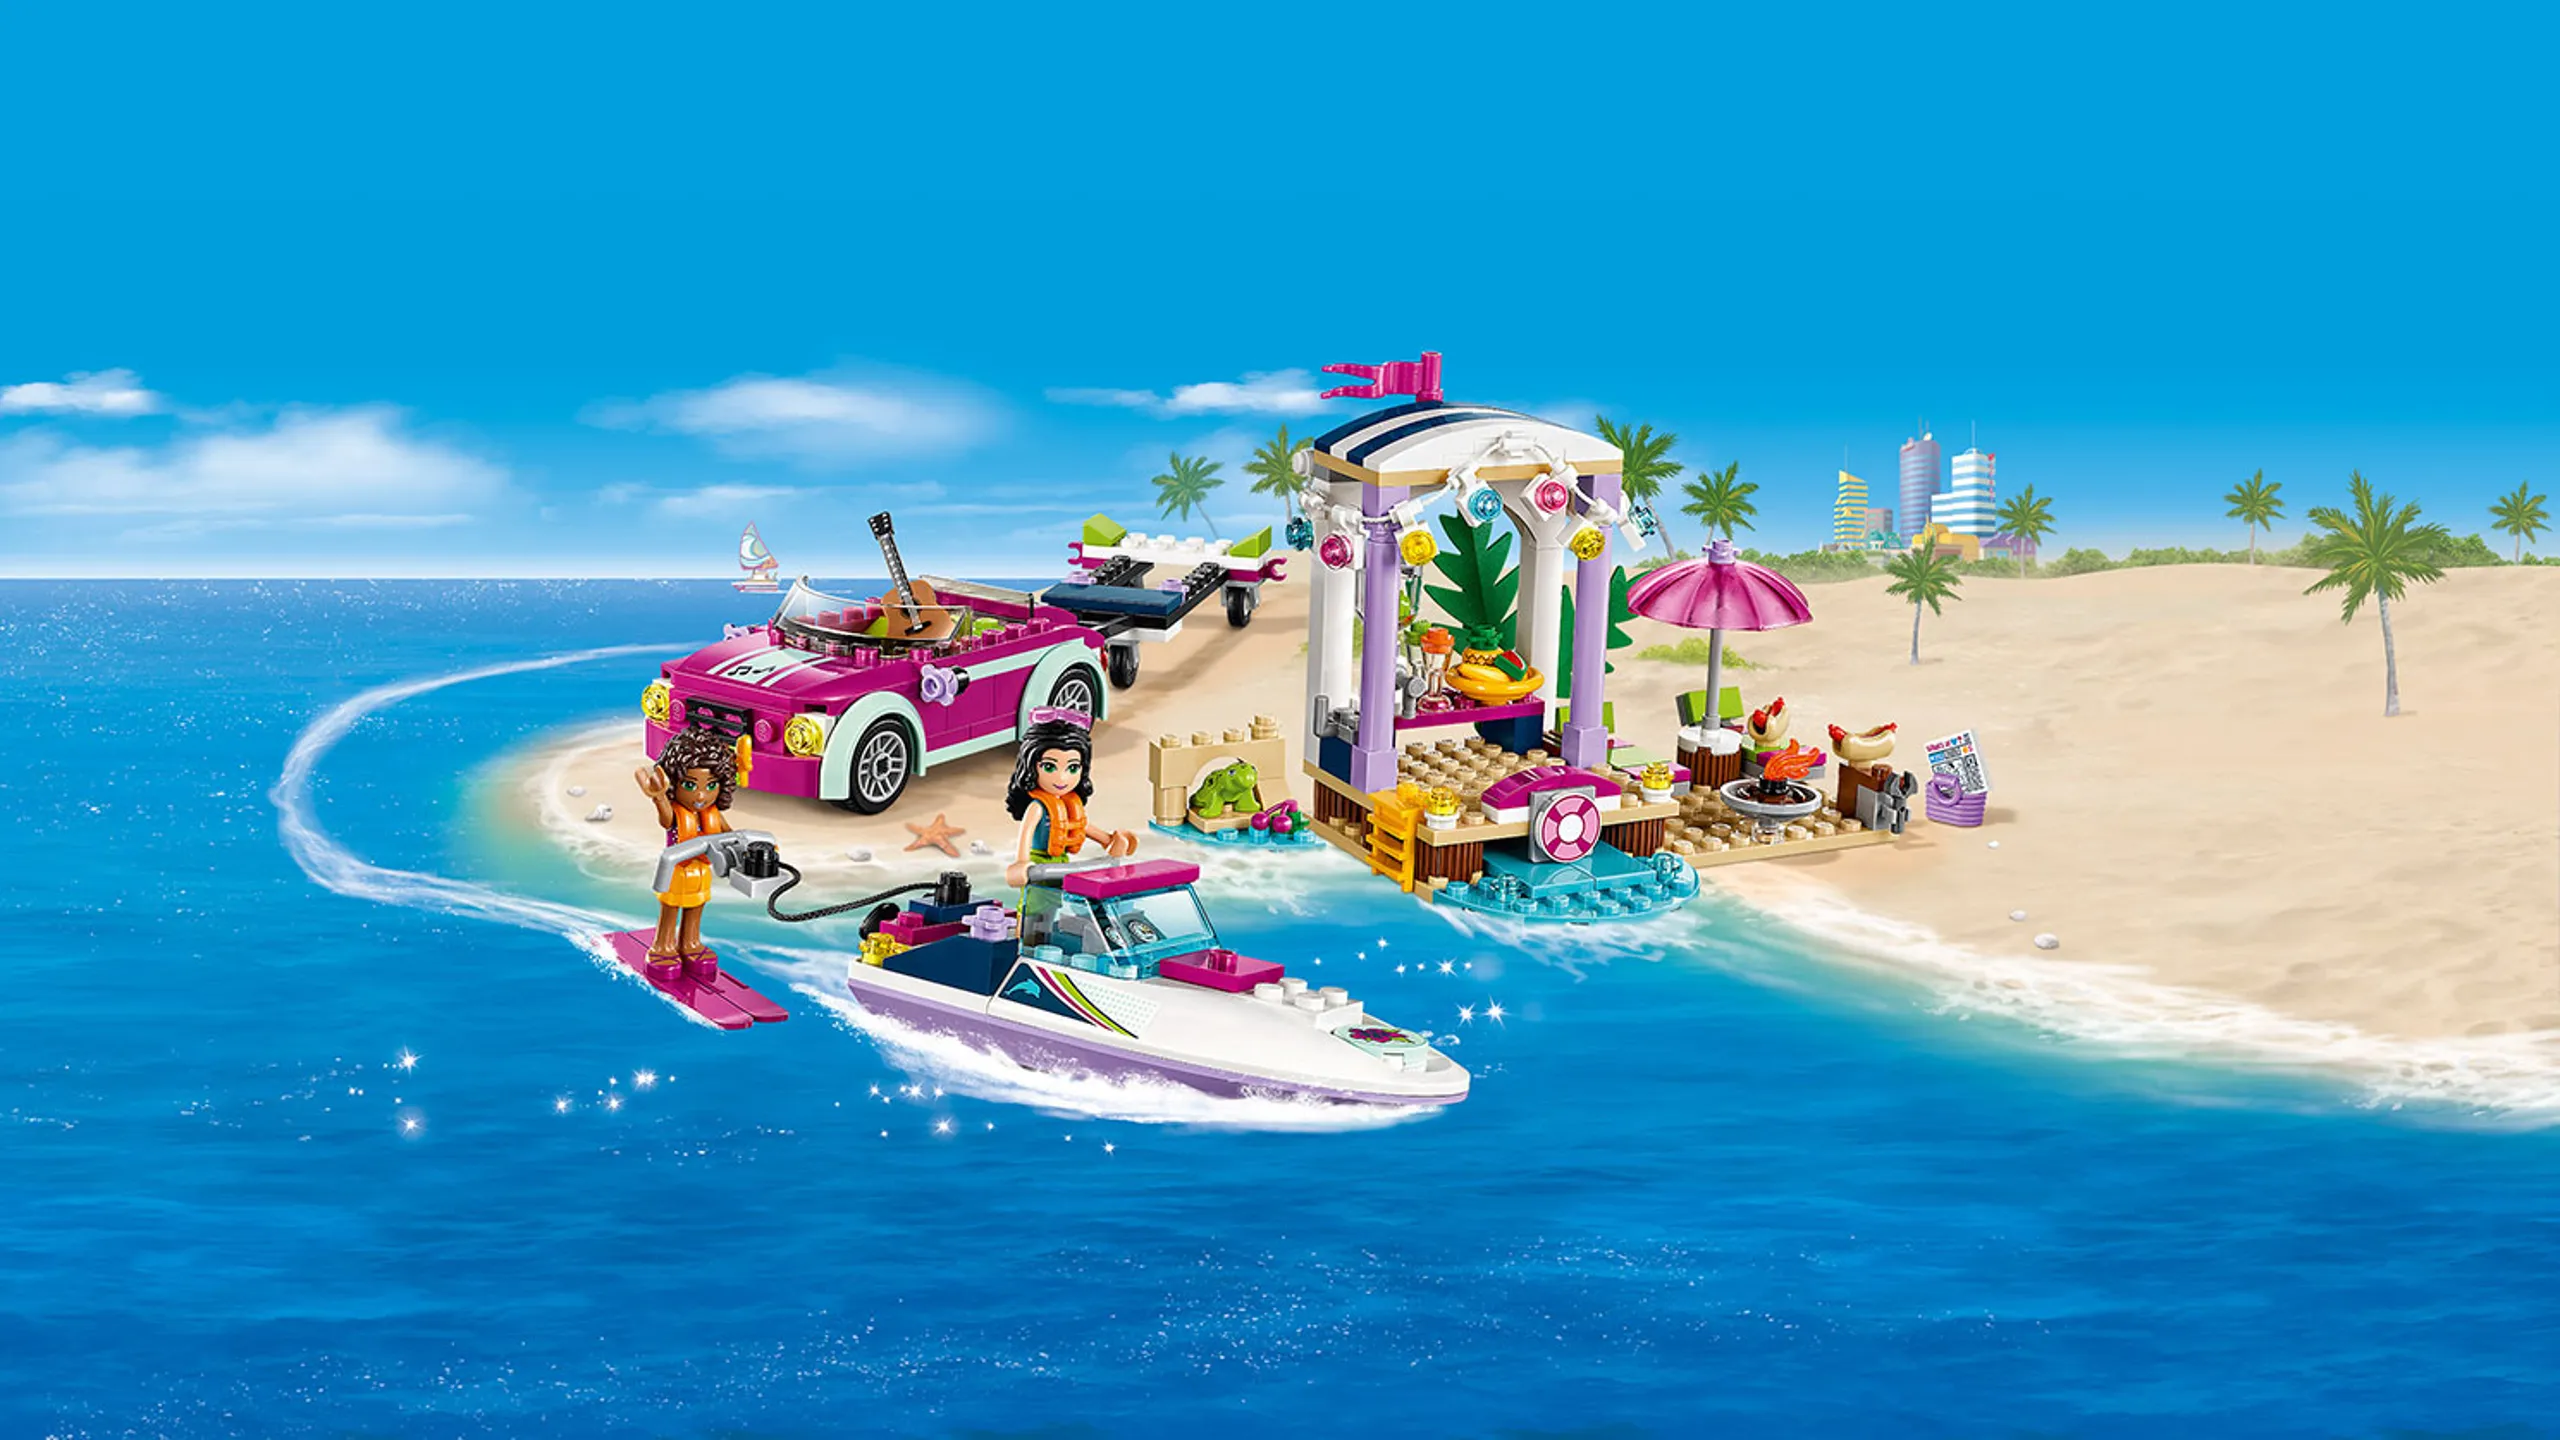 LEGO Friends - 41316 Andrea's Speedboat Transporter - Andrea is on the water ski at sea being towed by Emma on the Speedboat next to the beach party.